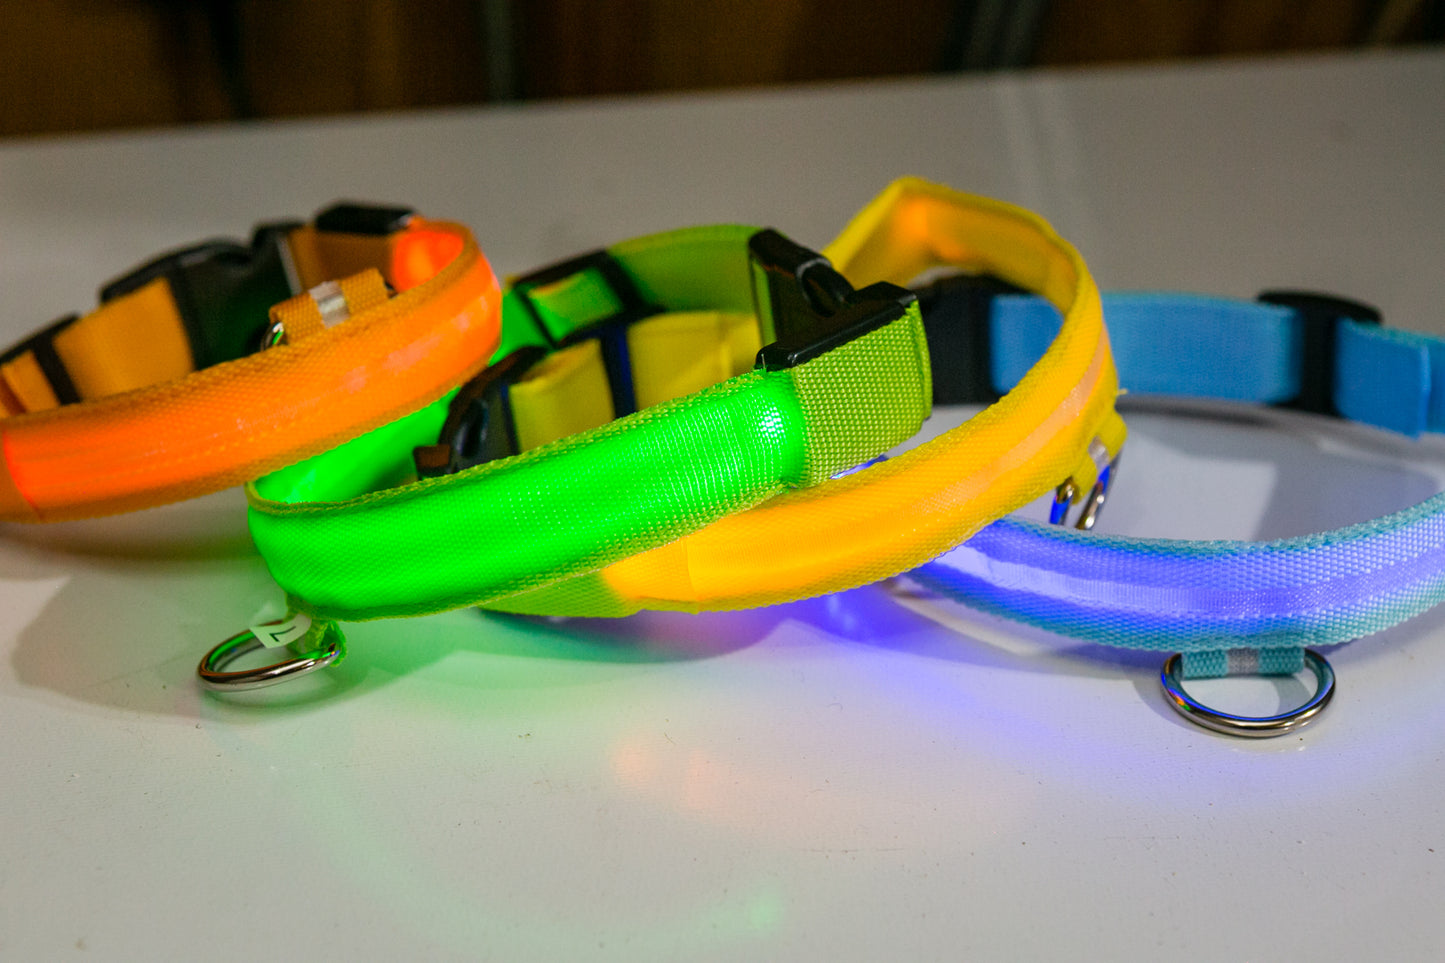 Rechargeable LED Pet Collar